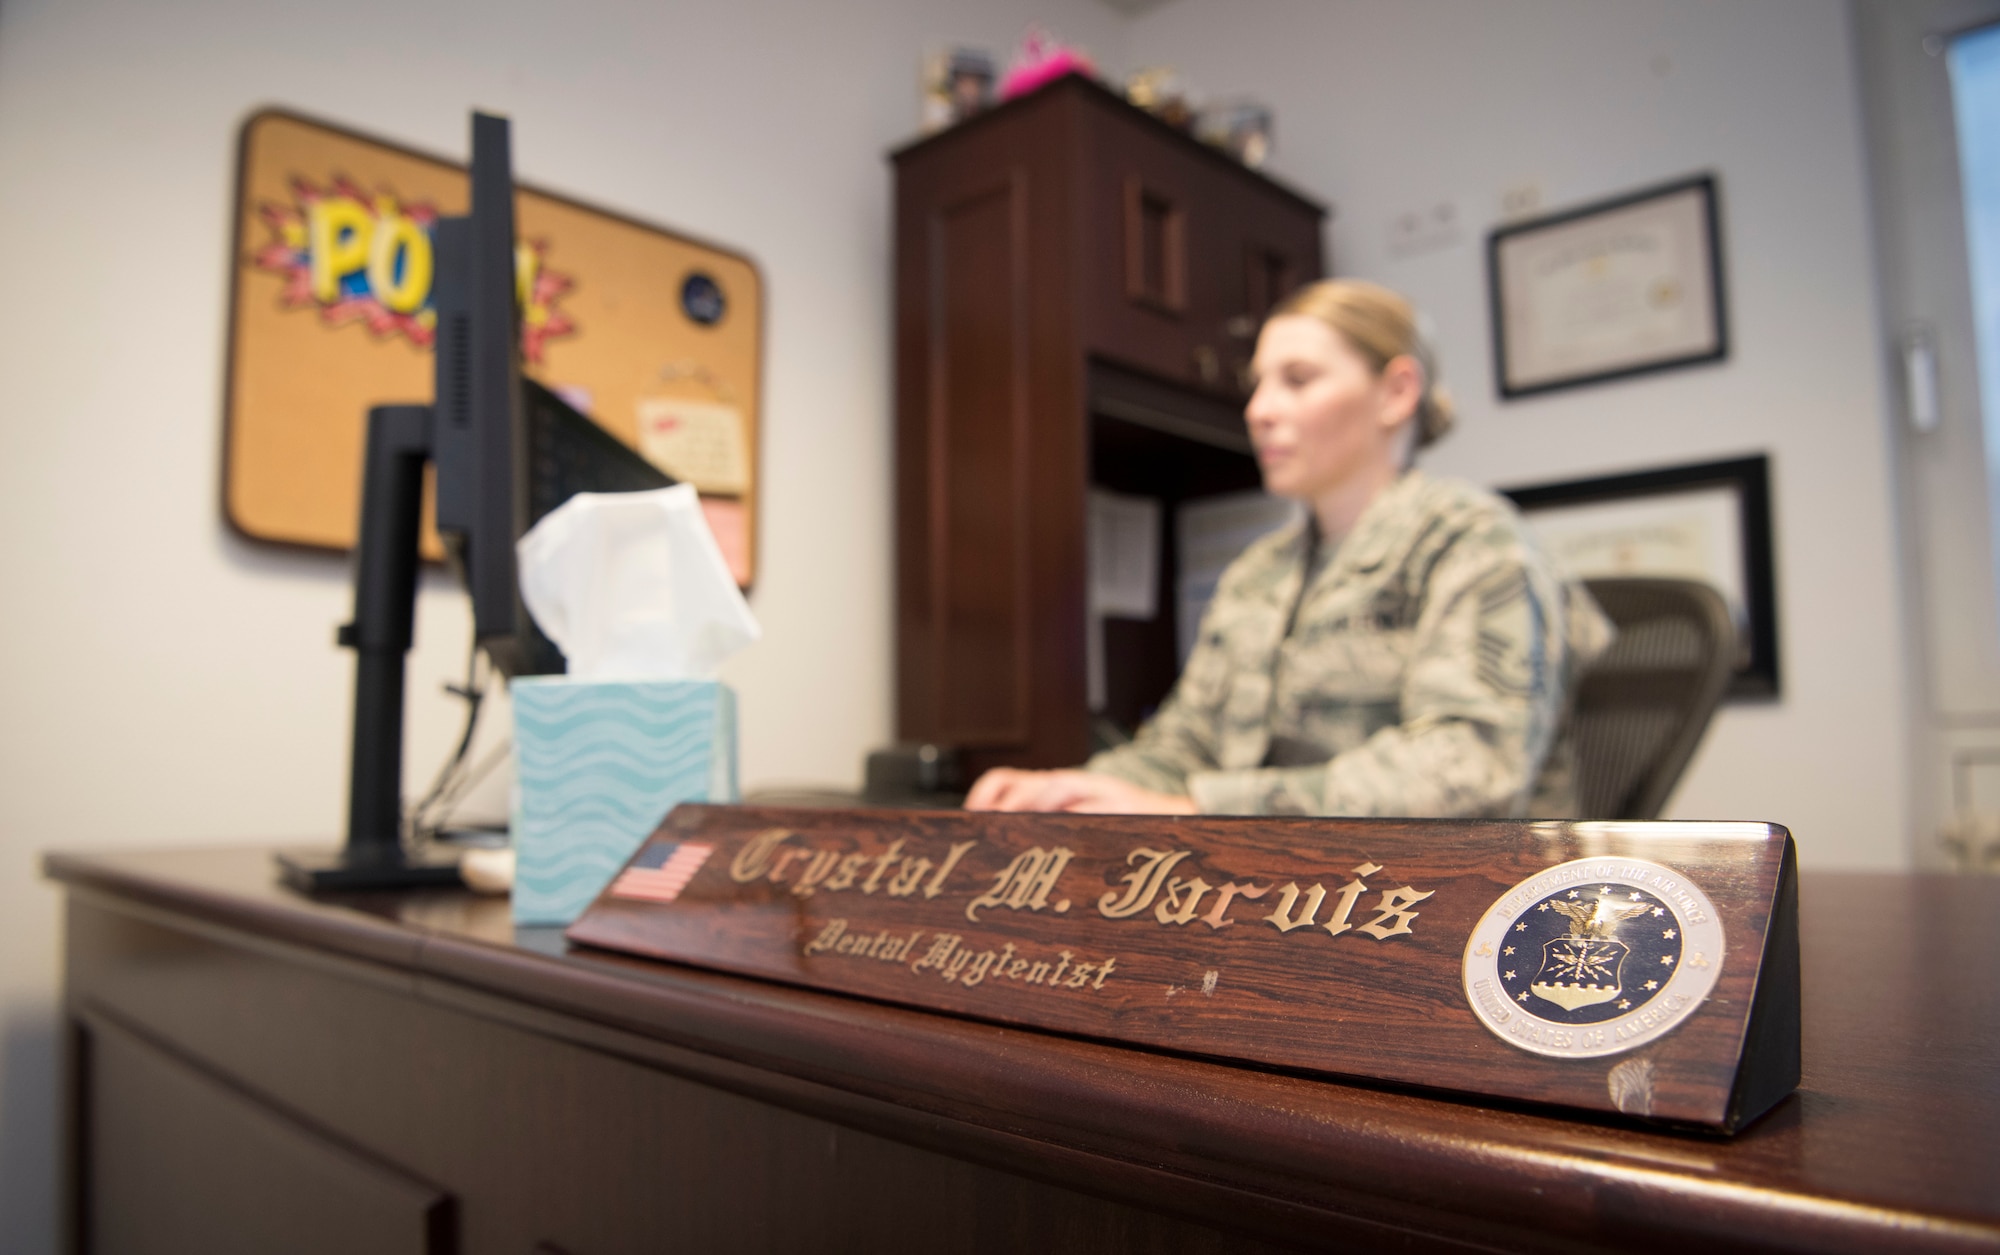 U.S. Air Force Chief Master Sgt. Shelly Jarvis, 86th Airlift Wing Dental Squadron superintendent and dental hygienist, works at her desk Nov. 7, 2018, Ramstein Air Base, Germany. As a dental hygienist, Jarvis can give patients deep cleanings, anesthetic, as well as chart and monitor patients with ailments such as gum disease. It was previously thought impossible for a dental hygienist to achieve the rank of chief master sergeant.